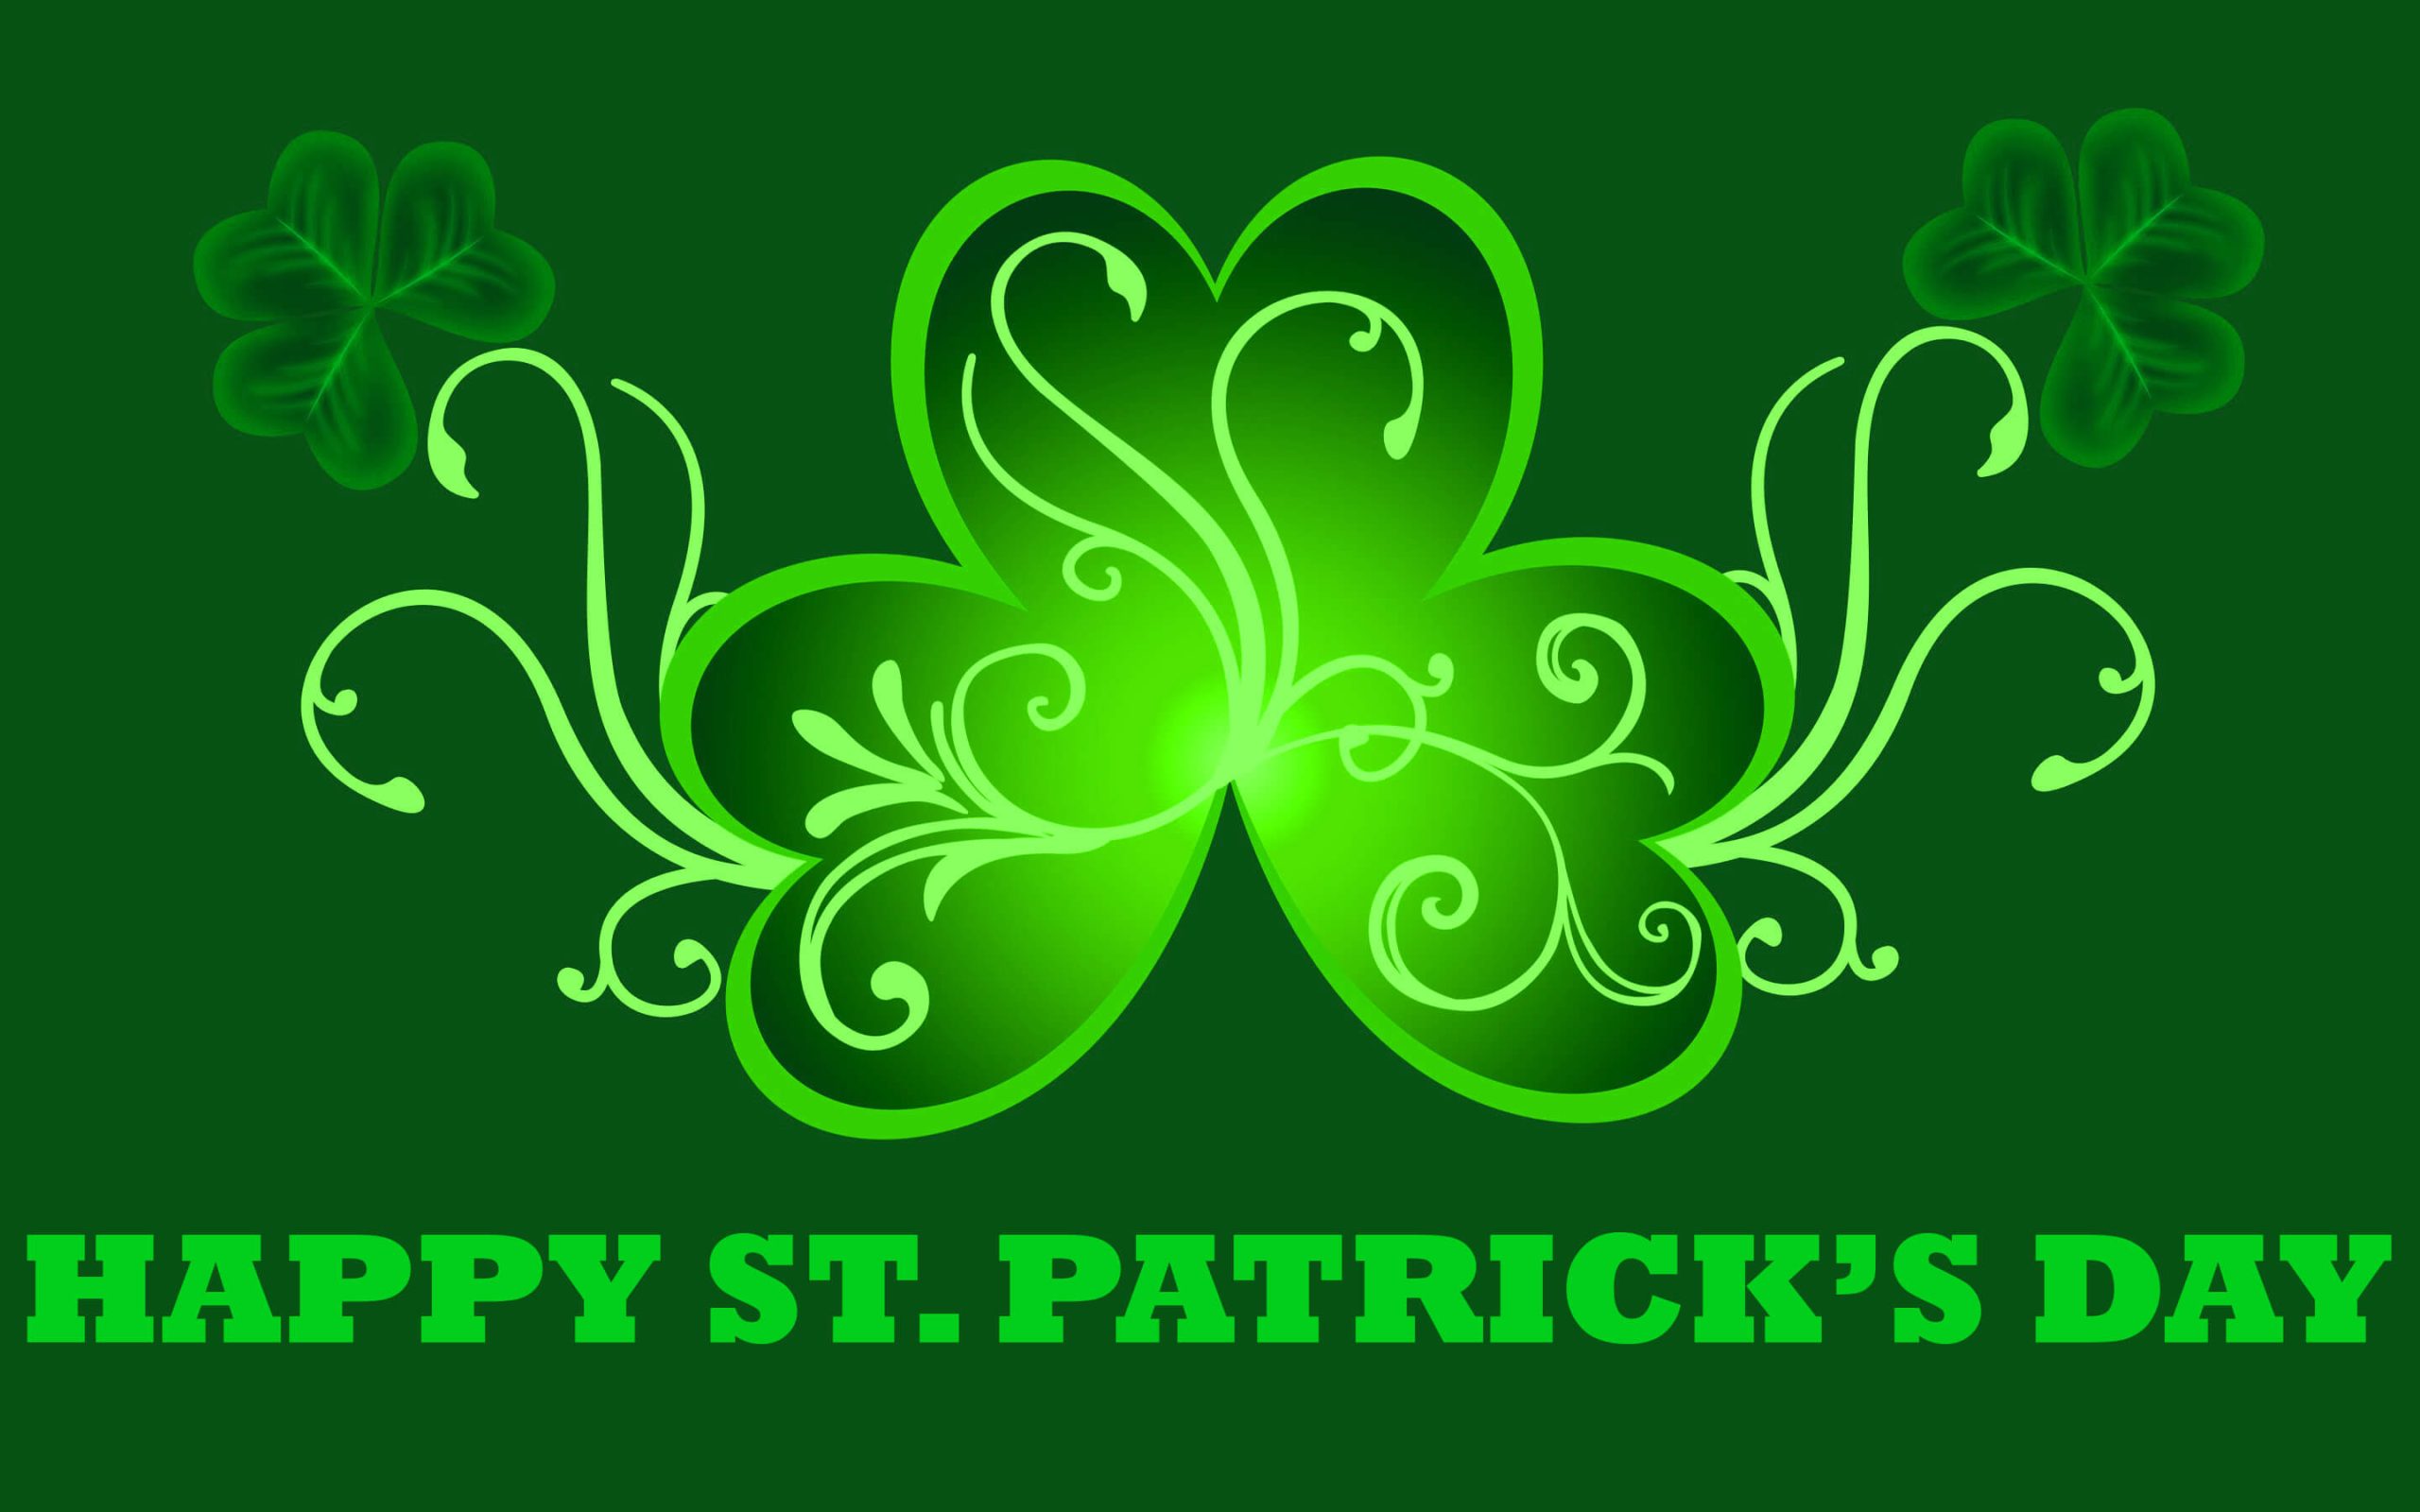 St Patrick’s Day Images Wishes